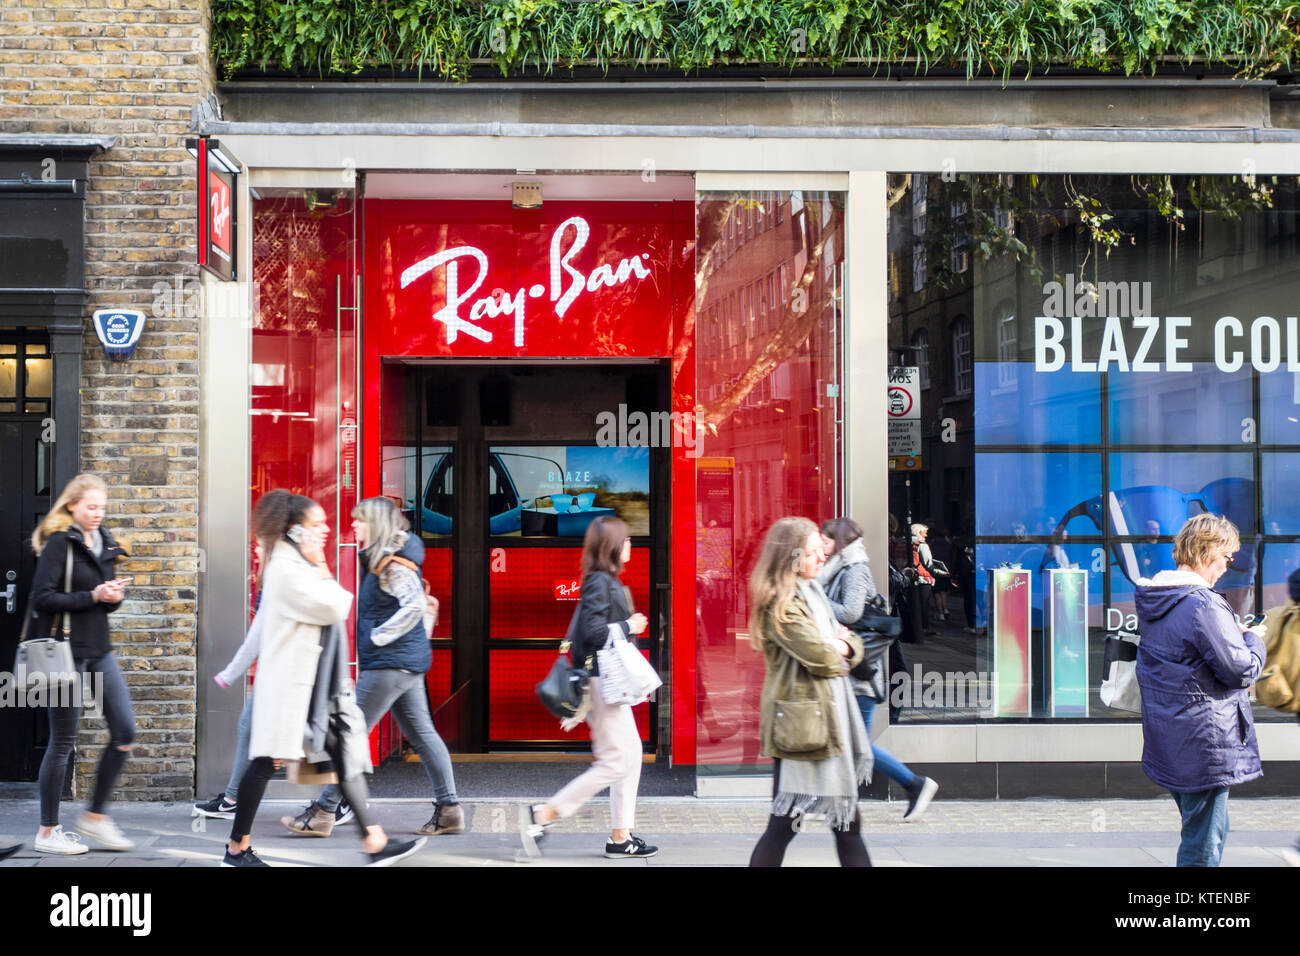 Ray Ban store, Covent Garden, London 